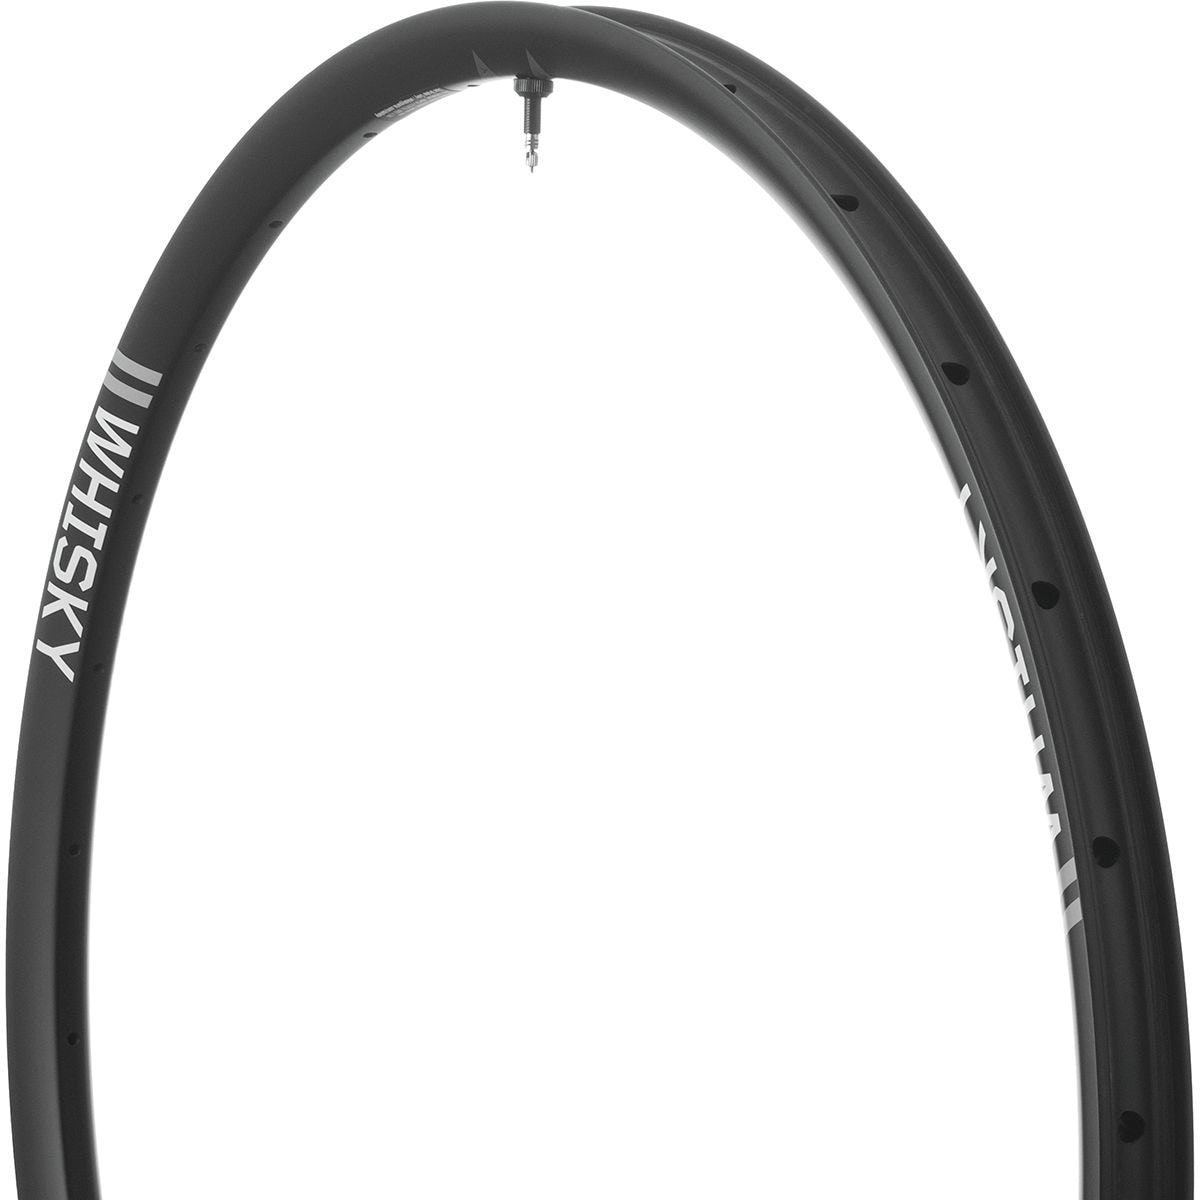 Whisky Parts Co. No.9 30w Carbon Tubeless Gravel Rim - 29in